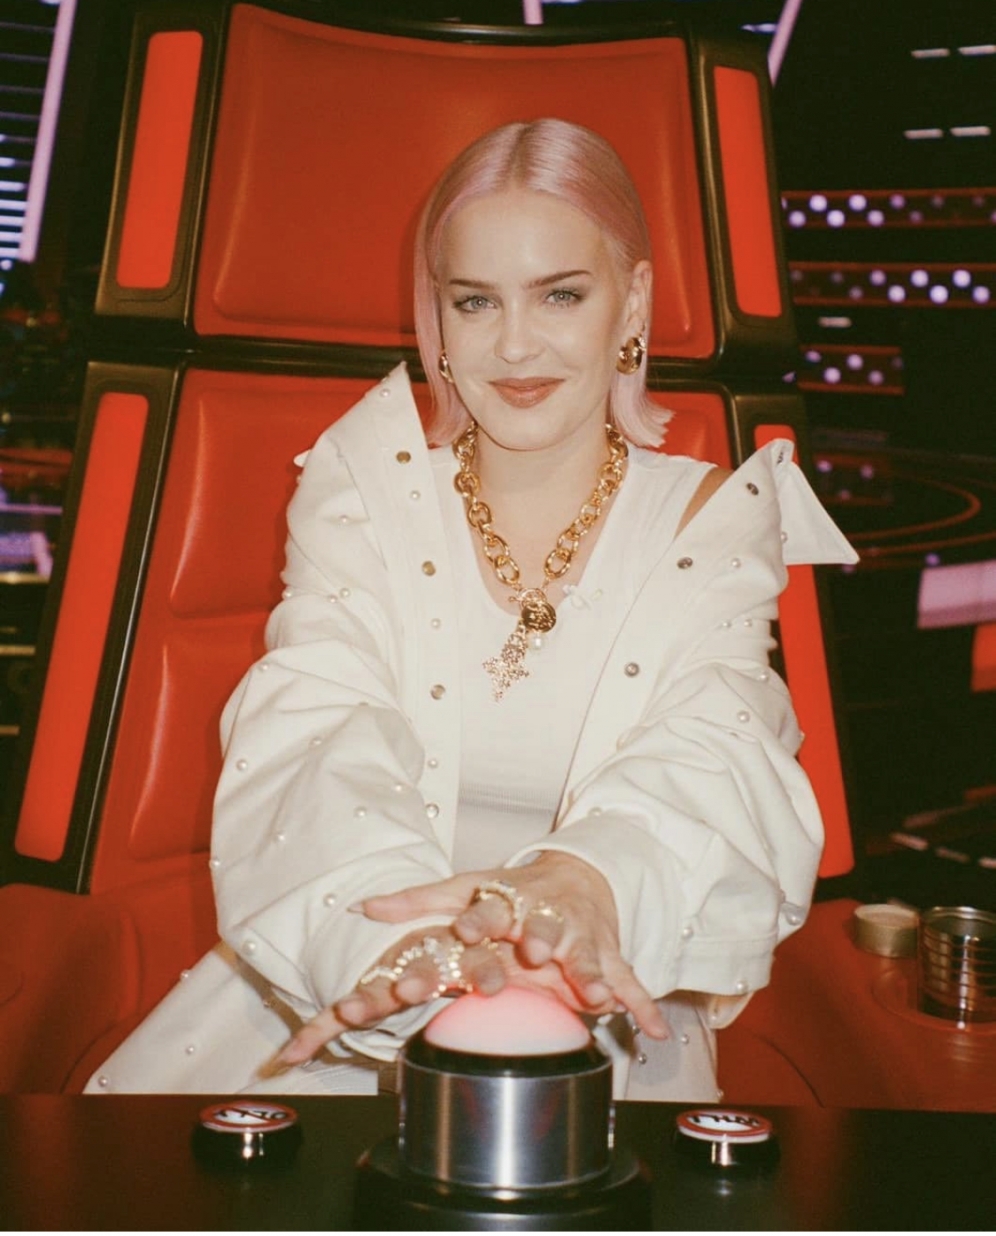 Anne Marie | The Voice UK